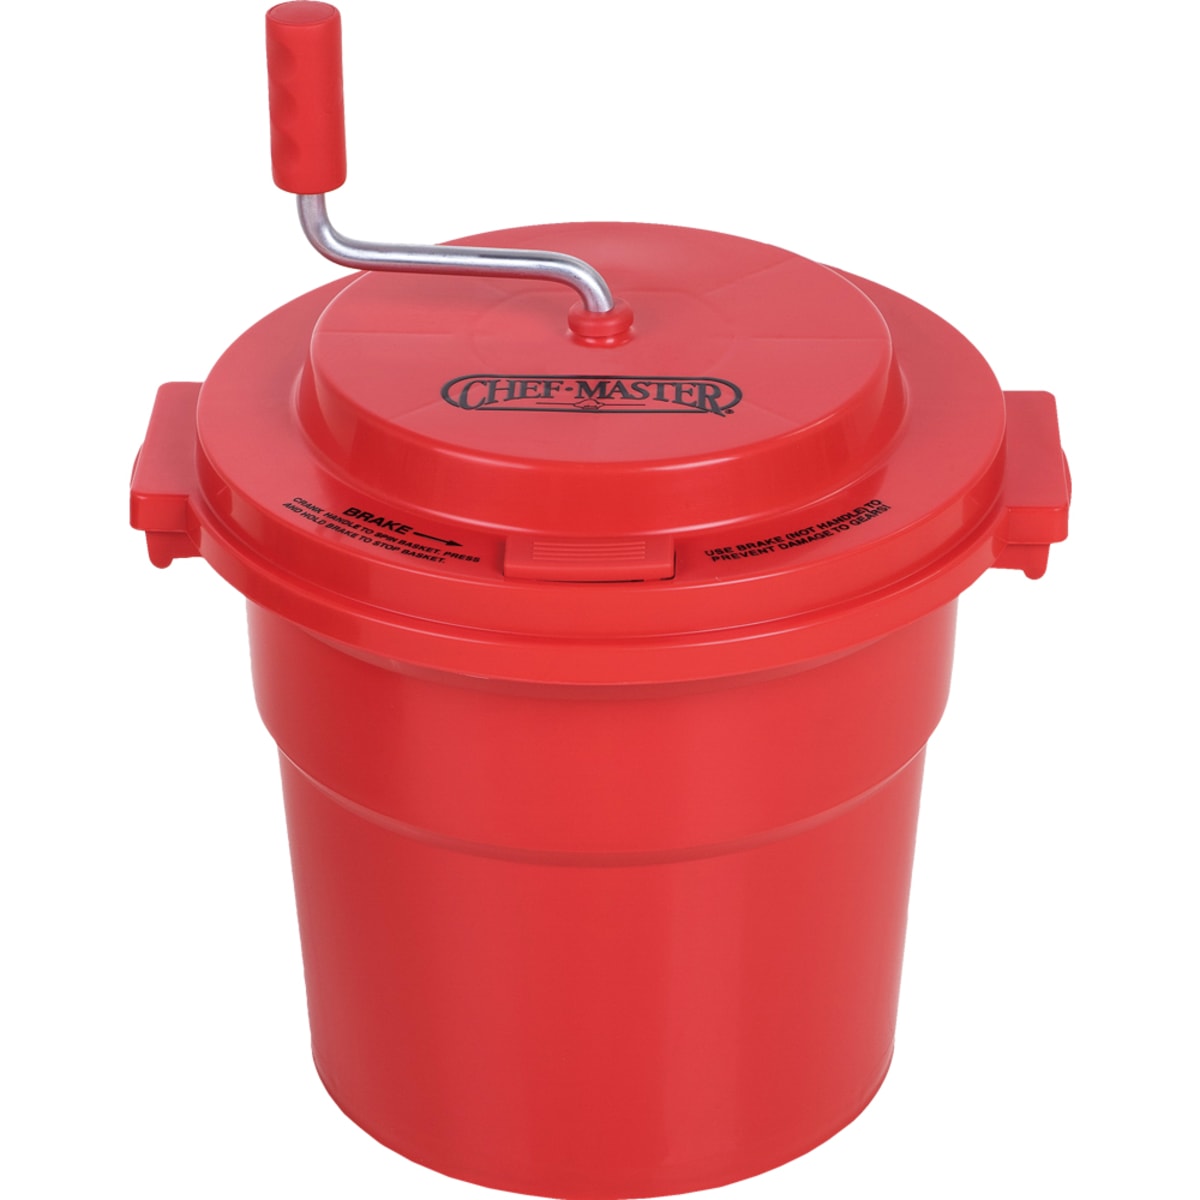 Chef-Master™ 90005 Red Manual 5-Gallon Salad Dryer Spinner